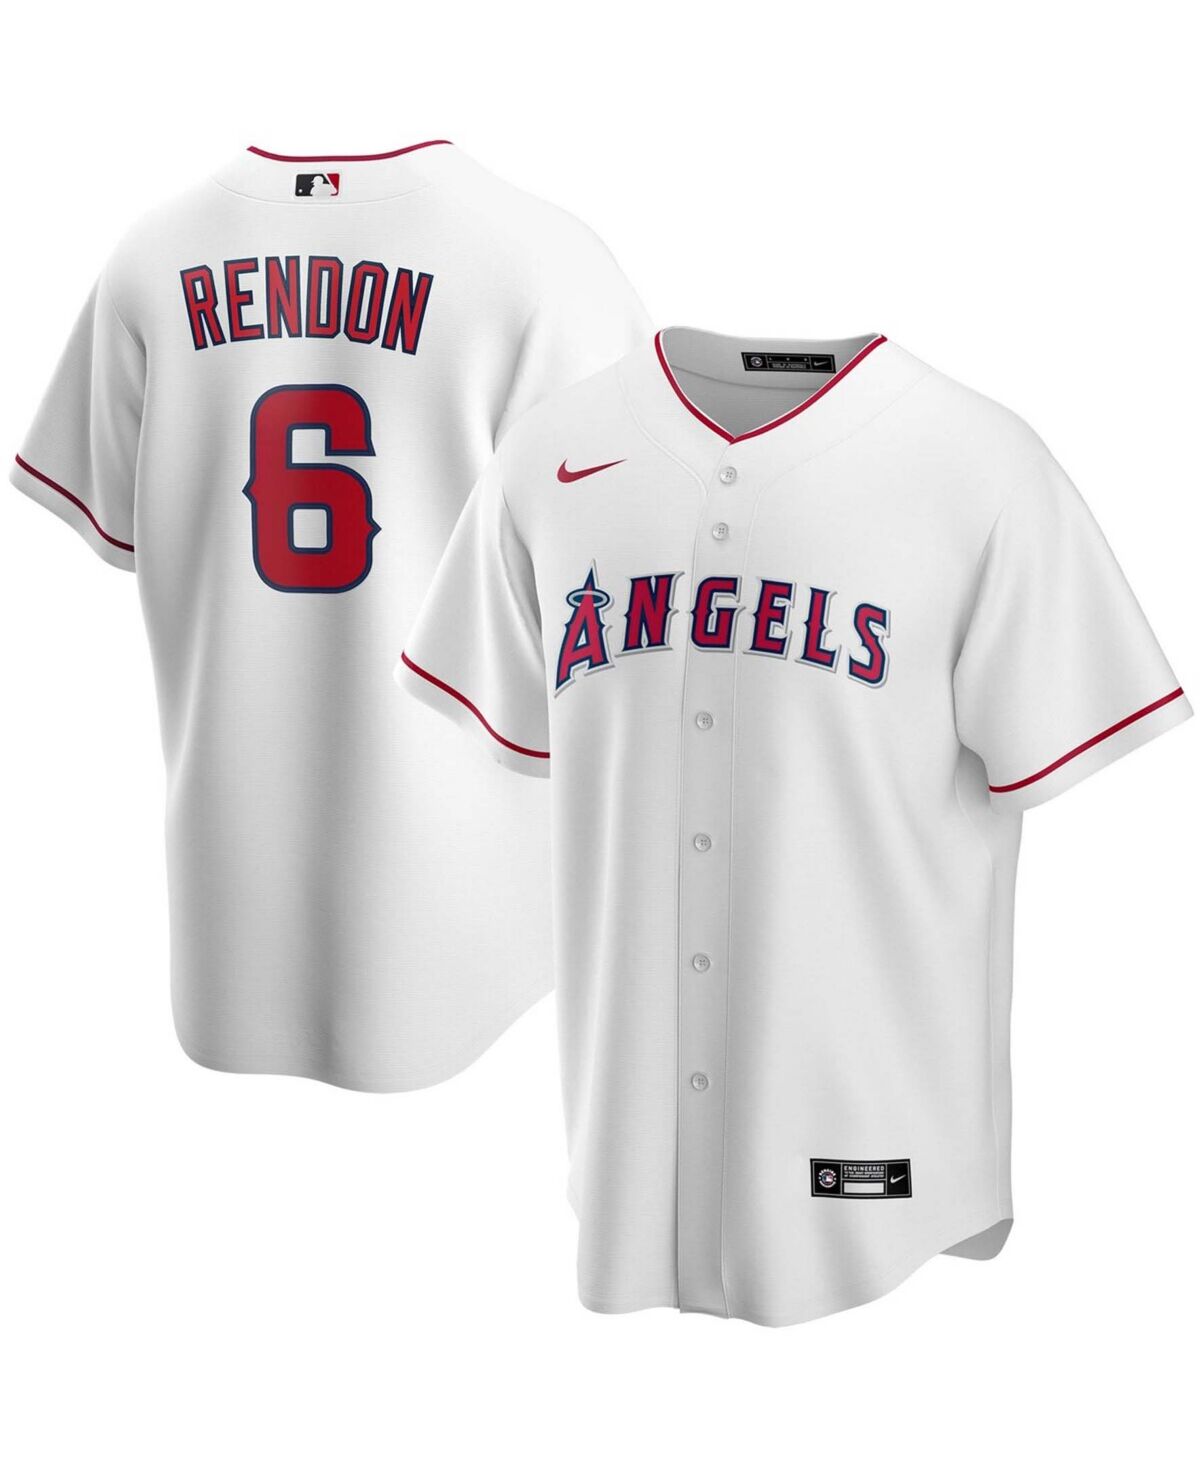 Nike Men's Anthony Rendon White Los Angeles Angels Home Replica Player Name Jersey - White